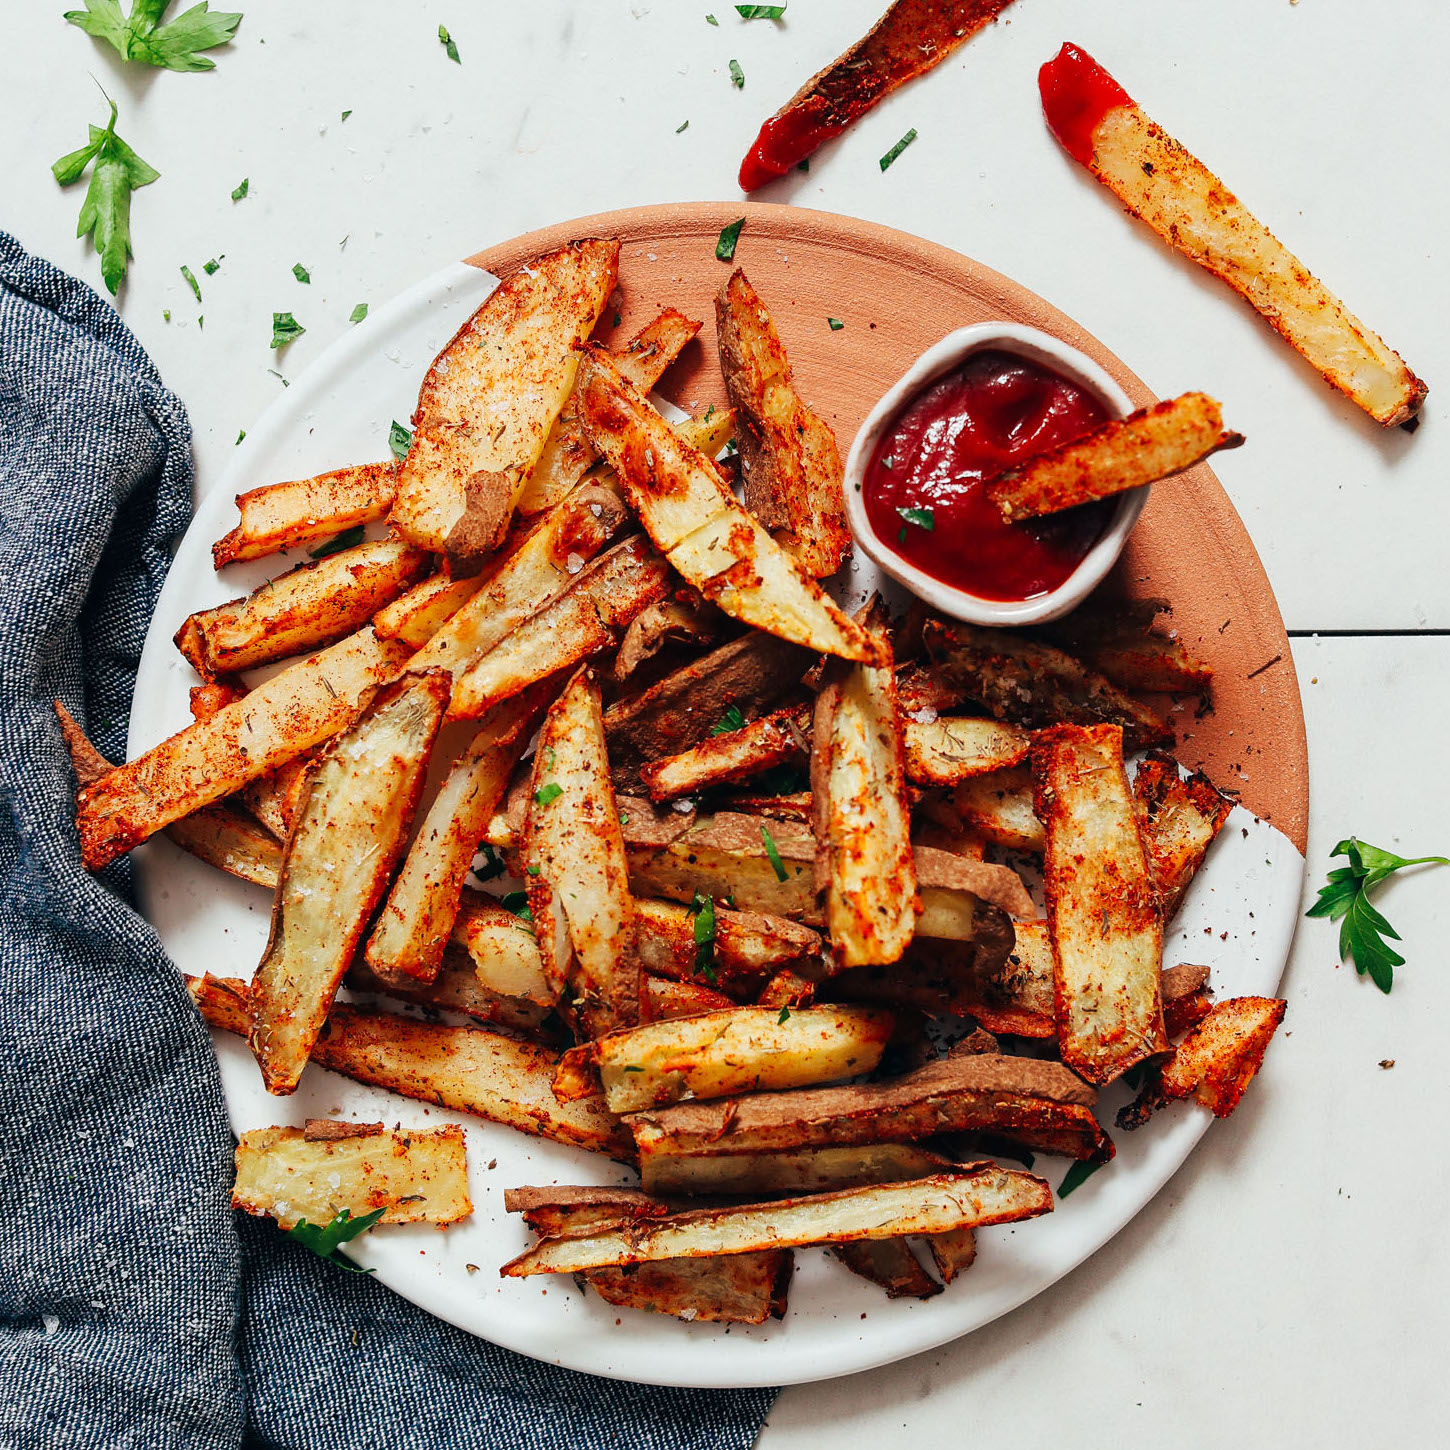 Mediabakery - Photo by Radius Images - Seasoned French Fries in